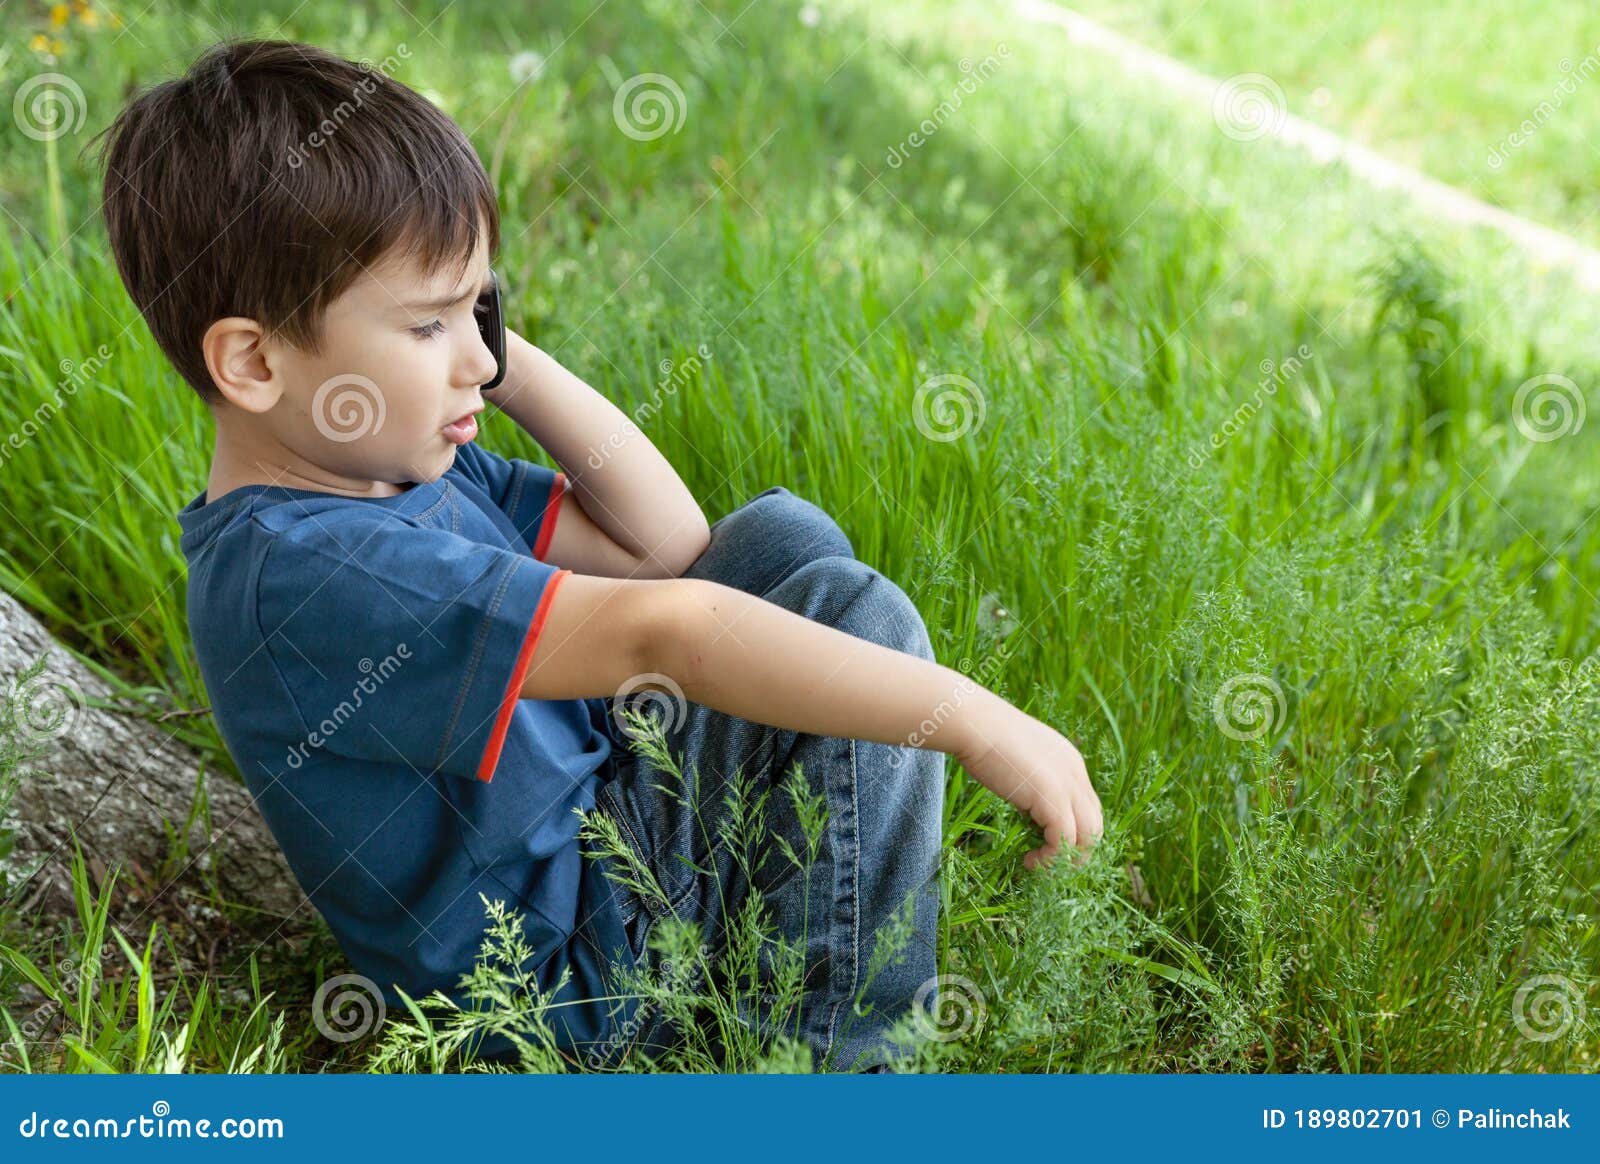 Little Boy on the Lawn among Green Grass Stock Image - Image of male ...